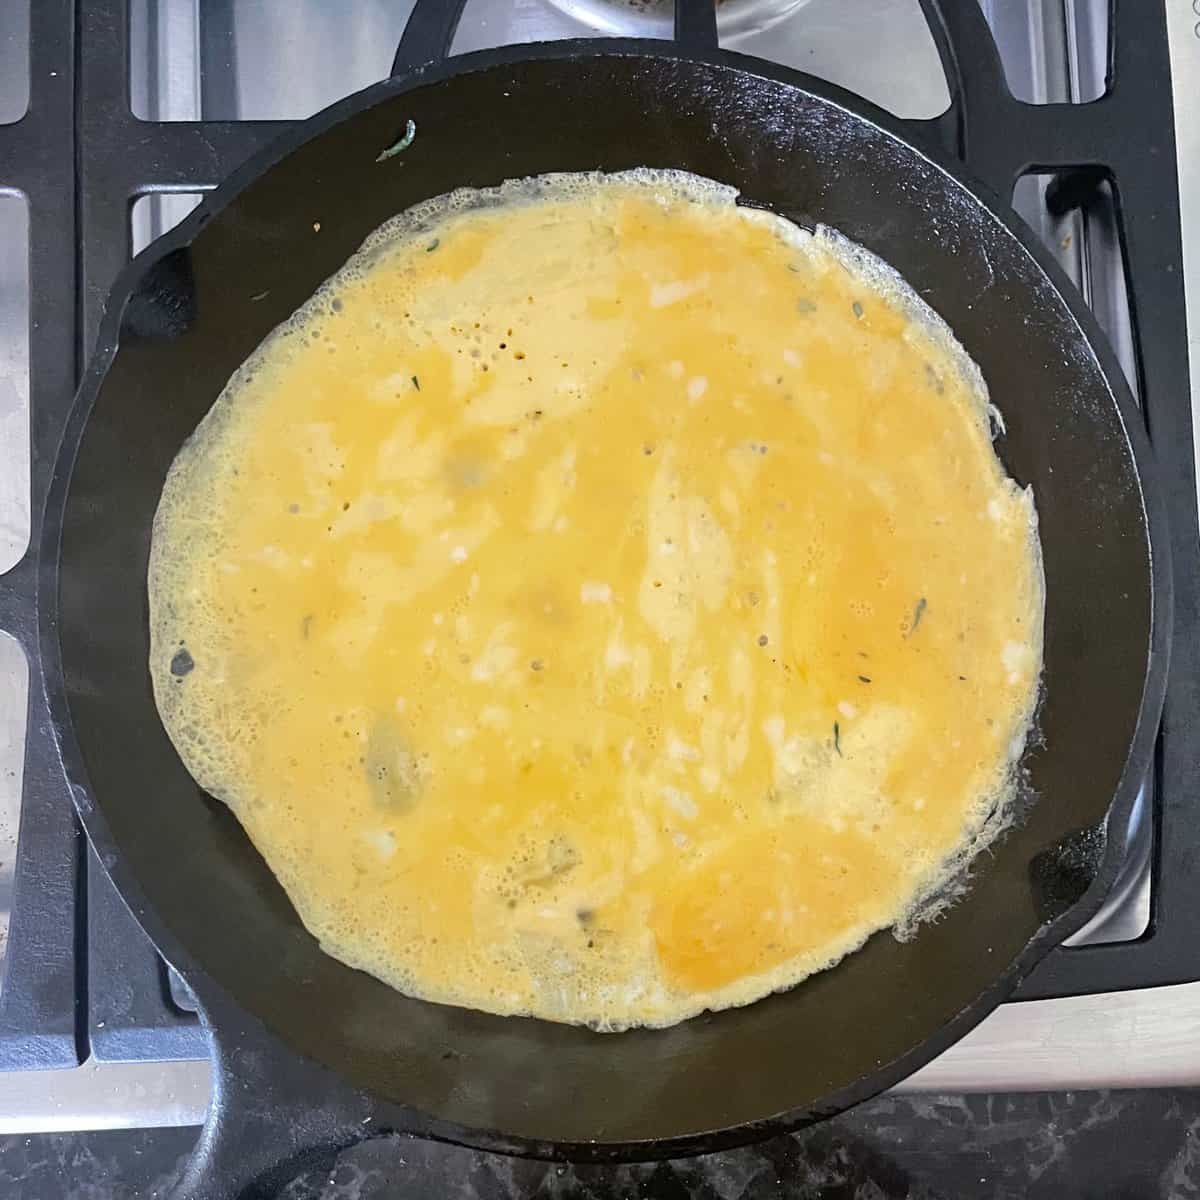 Cast iron pan bottom covered in cooked egg.